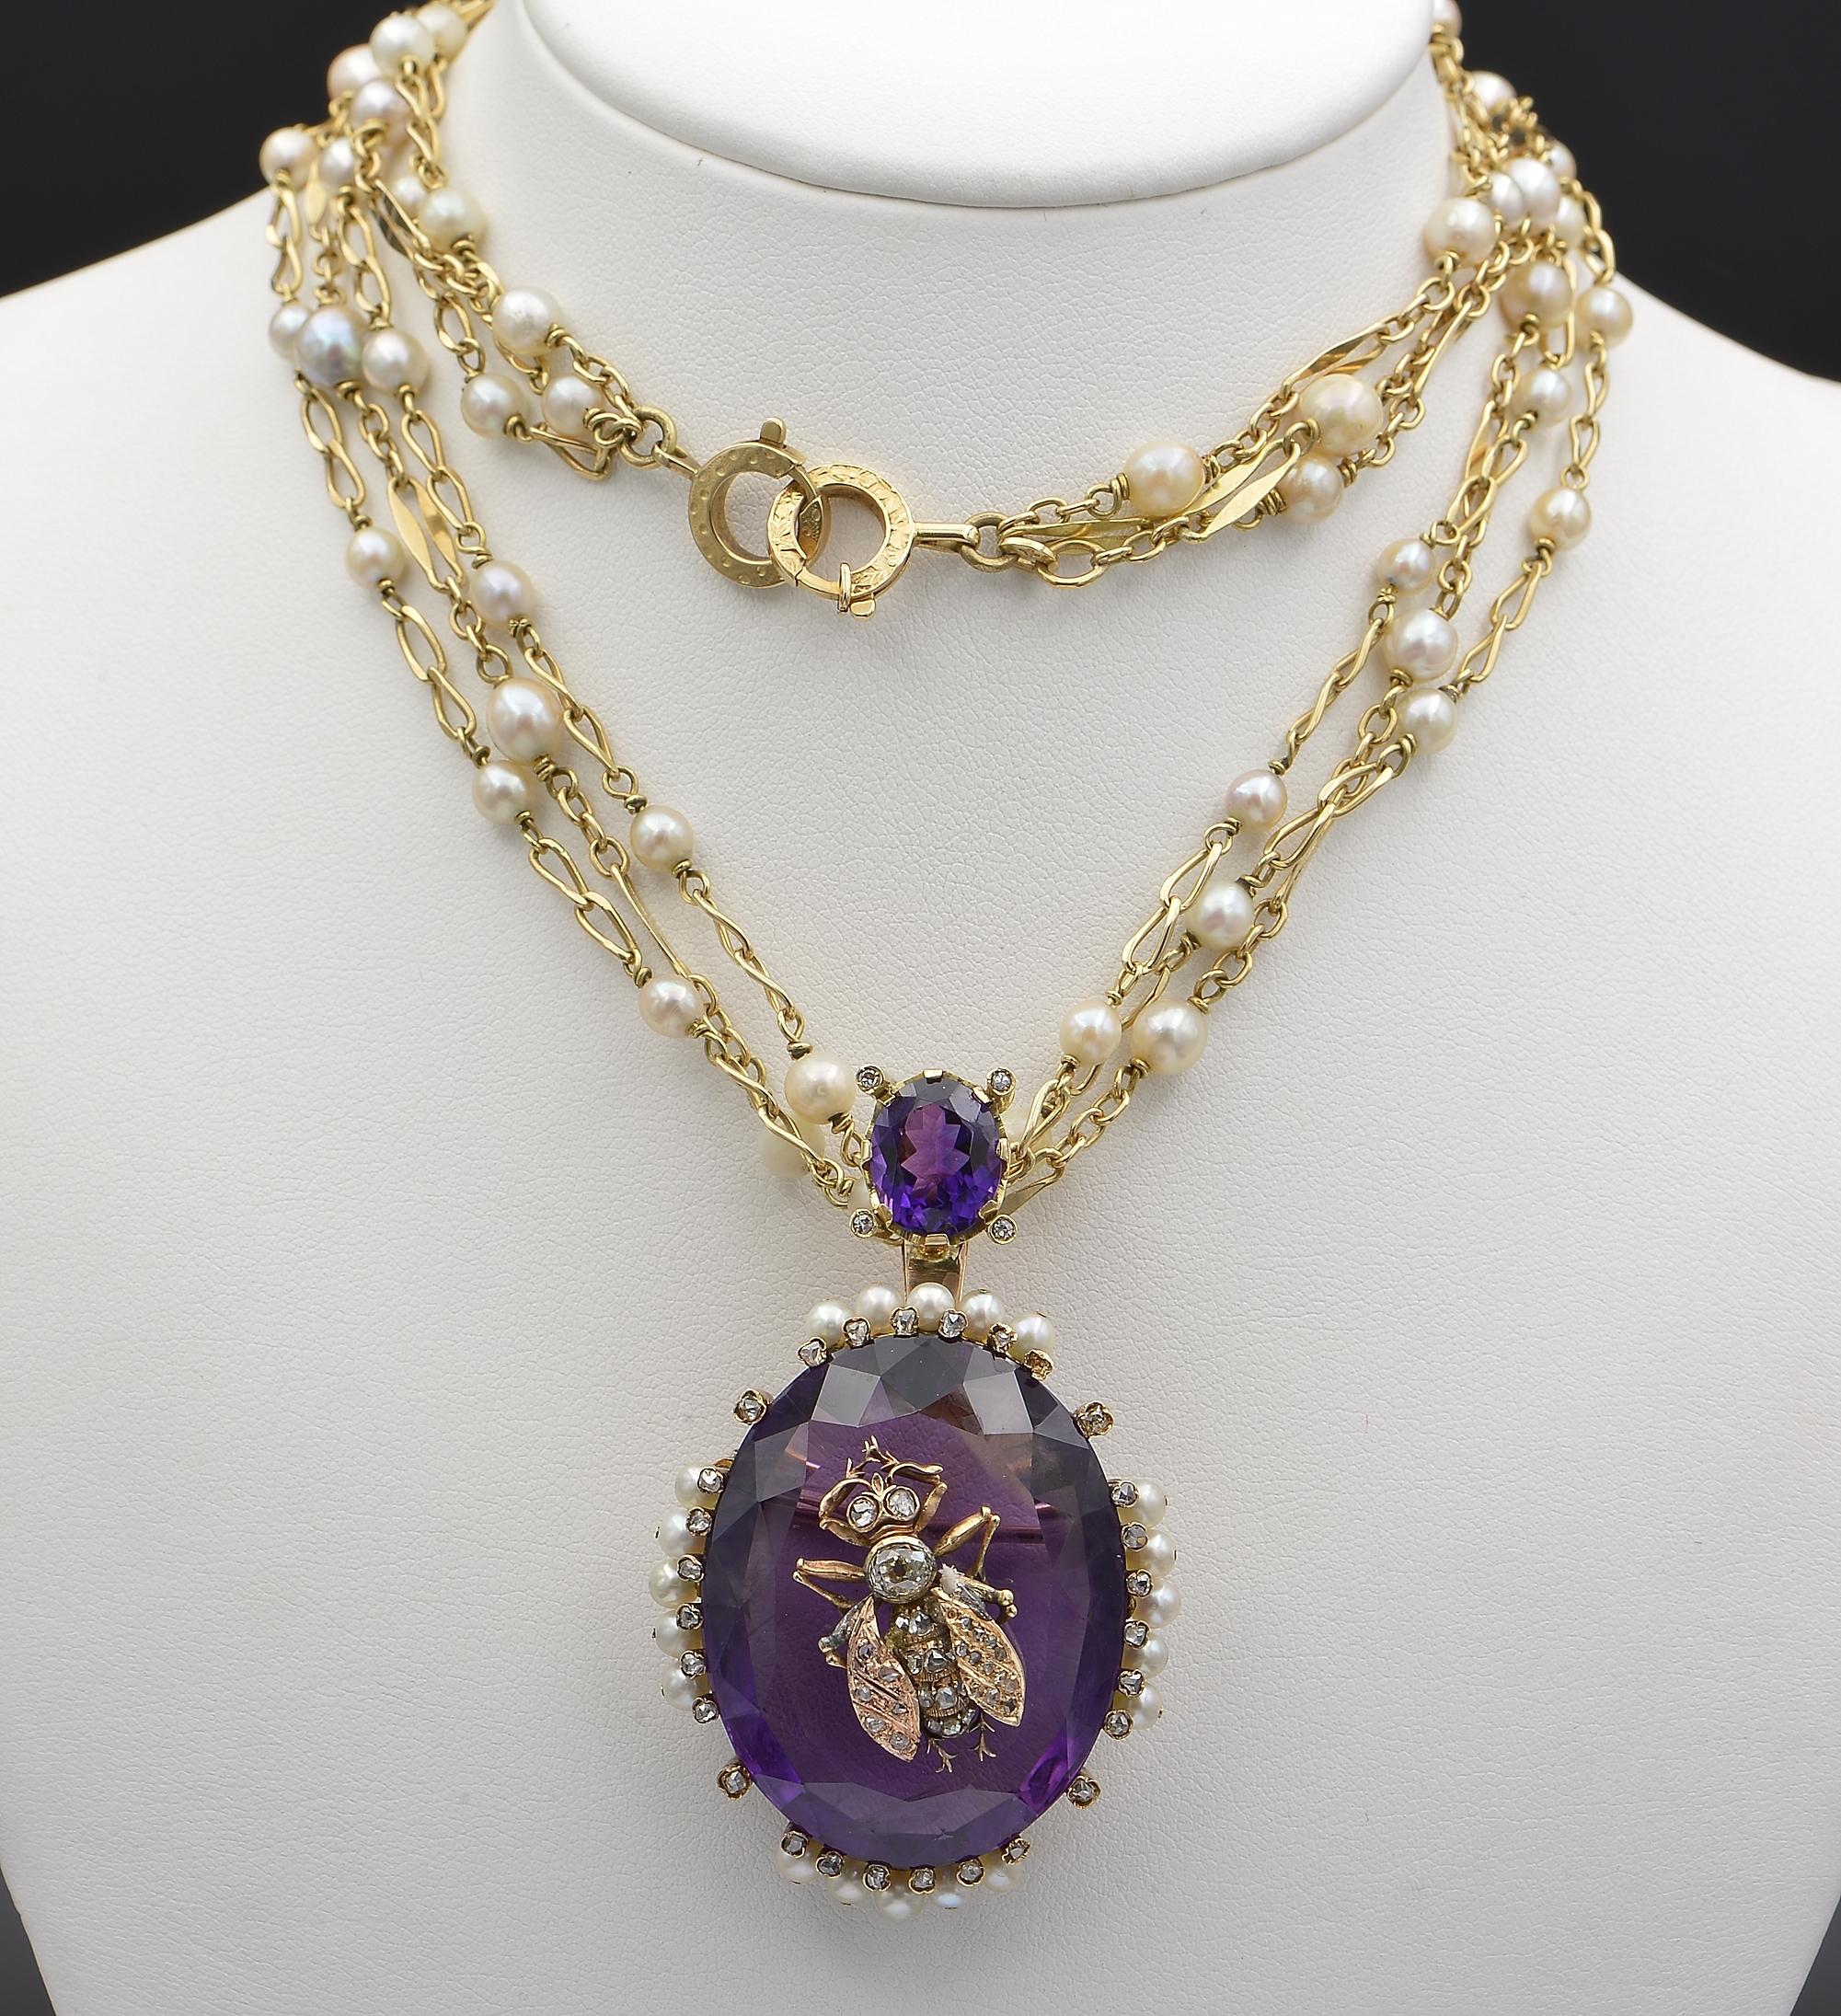 Outstanding necklace from the Victorian period, comes completed with  Pearl chain, possibly slightly later
Large amazing centre piece which can be brooch as well as pendant –  97.40 Ct Siberian Amethyst 37 mm. x 29 mm.) topped by a smaller Amethyst